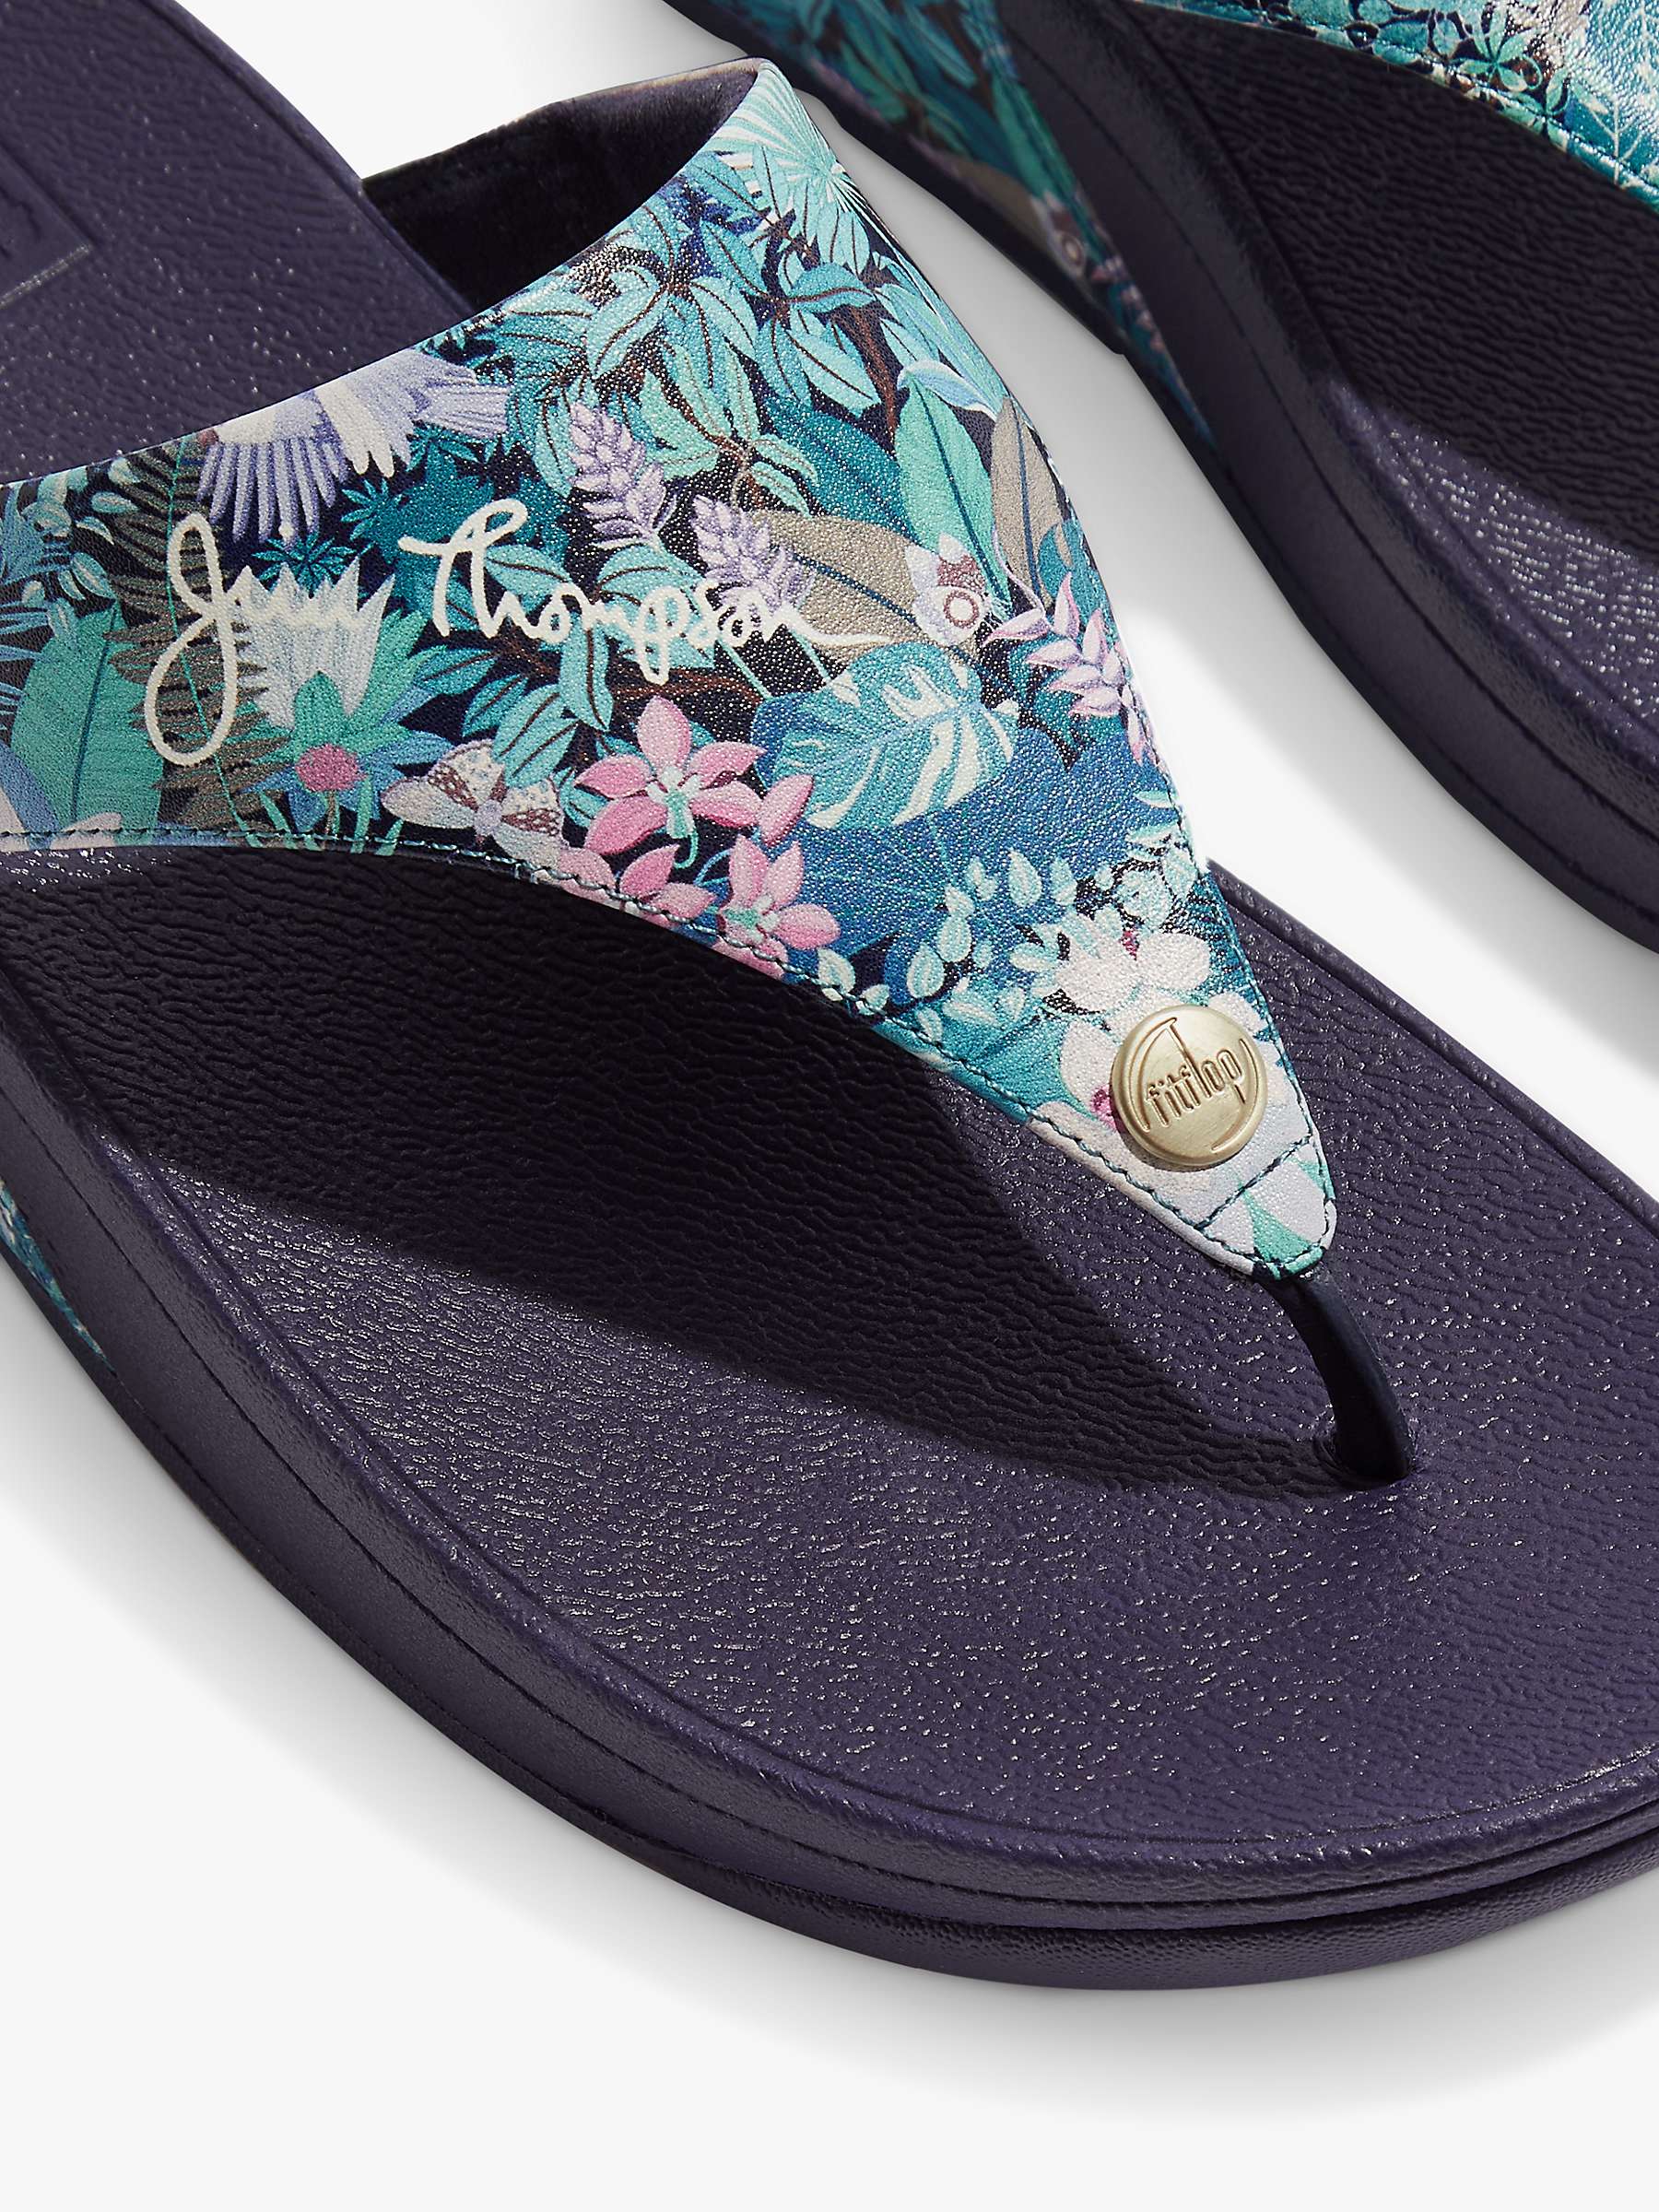 Buy FitFlop Jim Thompson Lulu Leather Toe Post Sandals, Heritage Blue Online at johnlewis.com